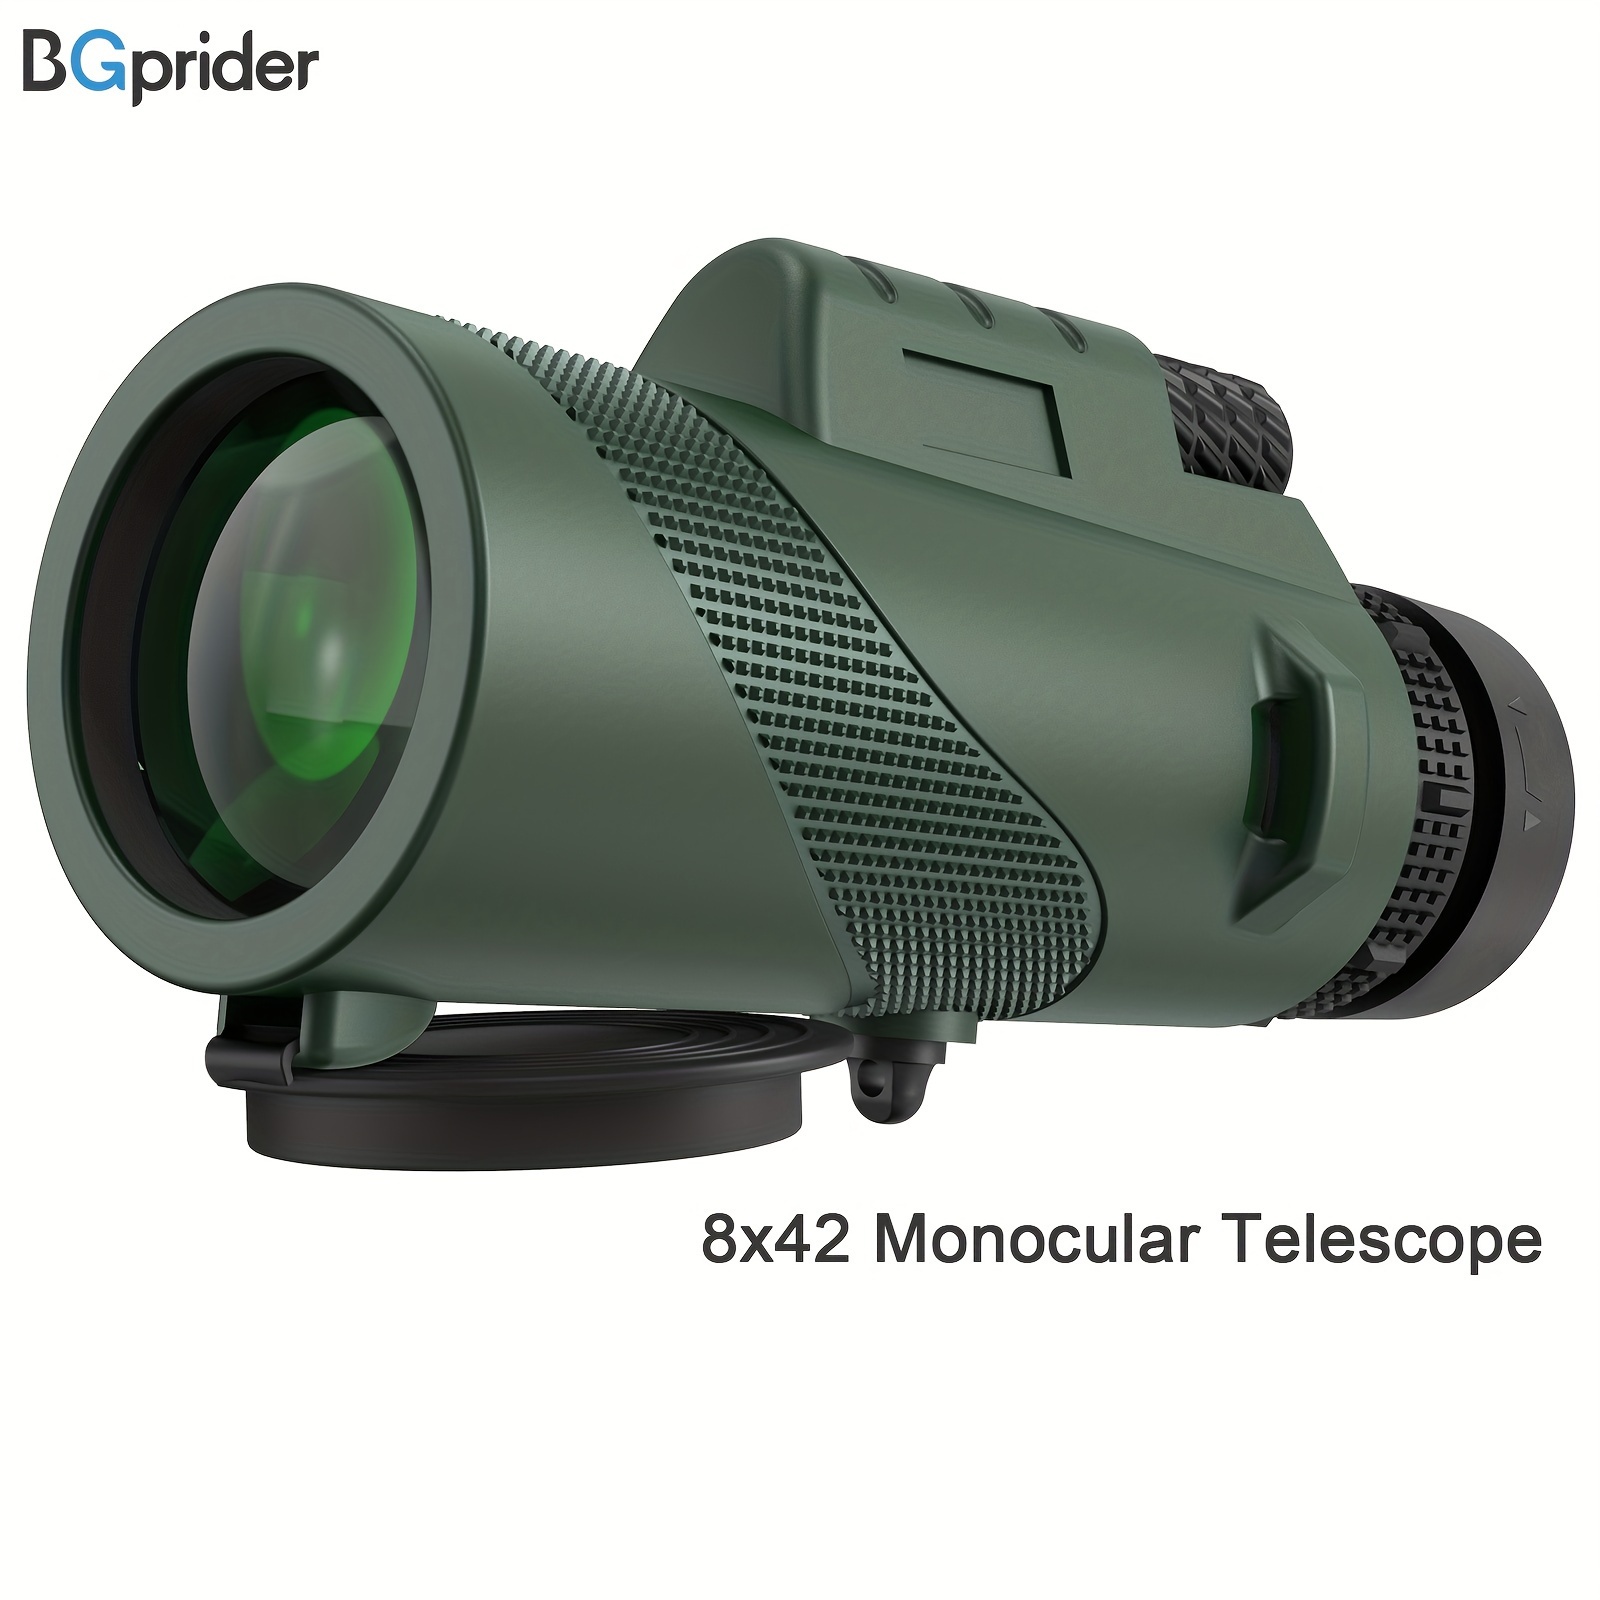 

8x42 Monocular Telescope For Adults High Powered Hd Compact Handheld Monocular With Bak4 Prism Fmc Lens For Bird Watching Hiking Camping Comcerts